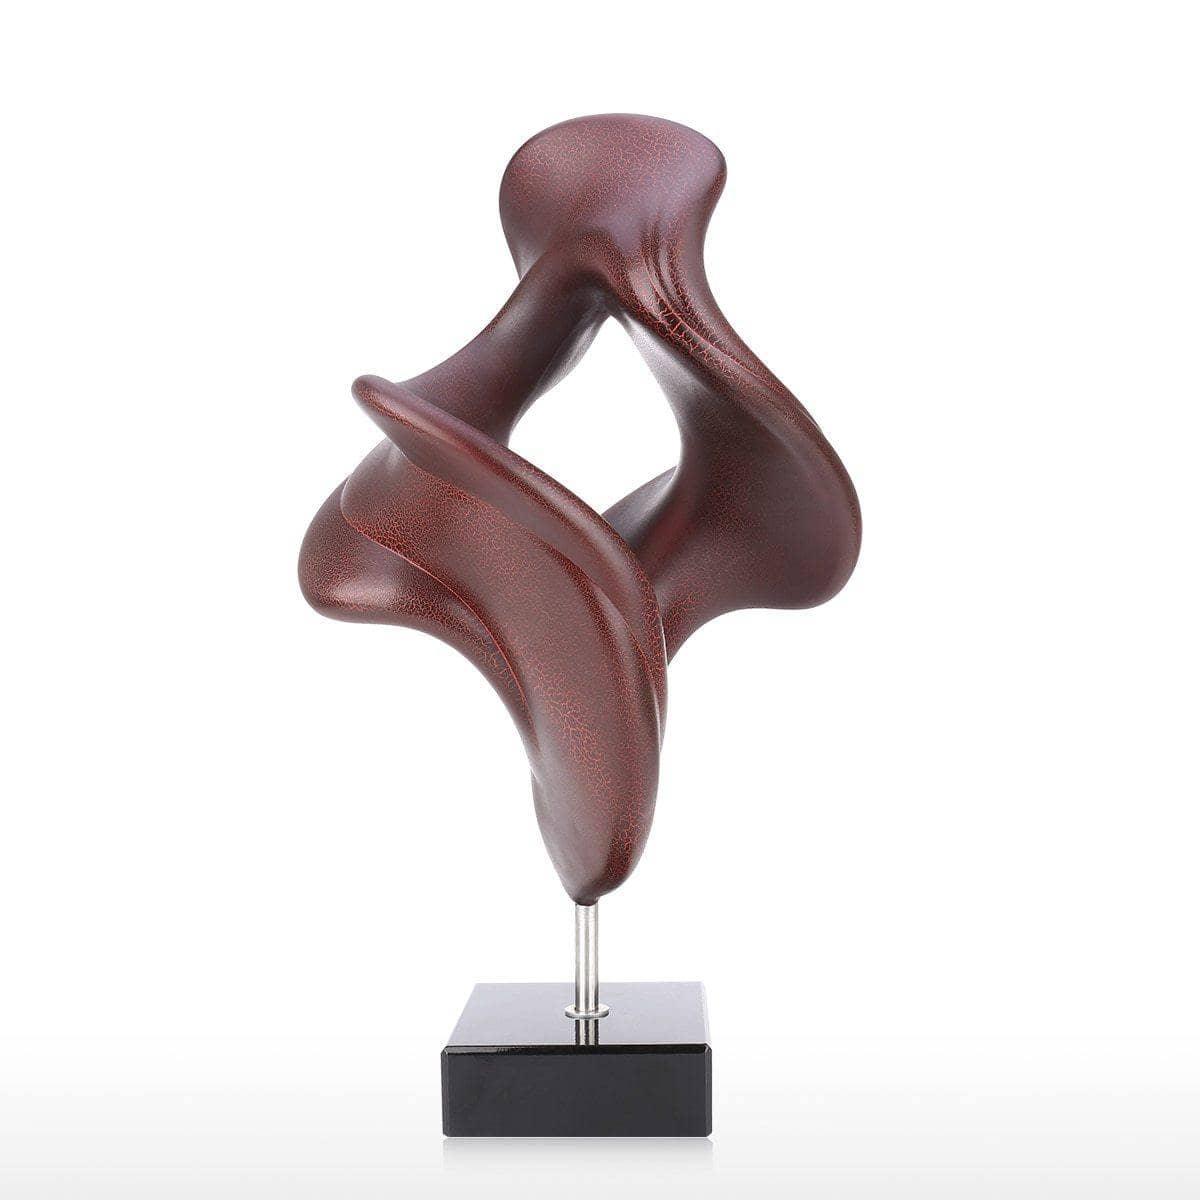 Striking Modern Art Statue: A Bold Statement for Your Space